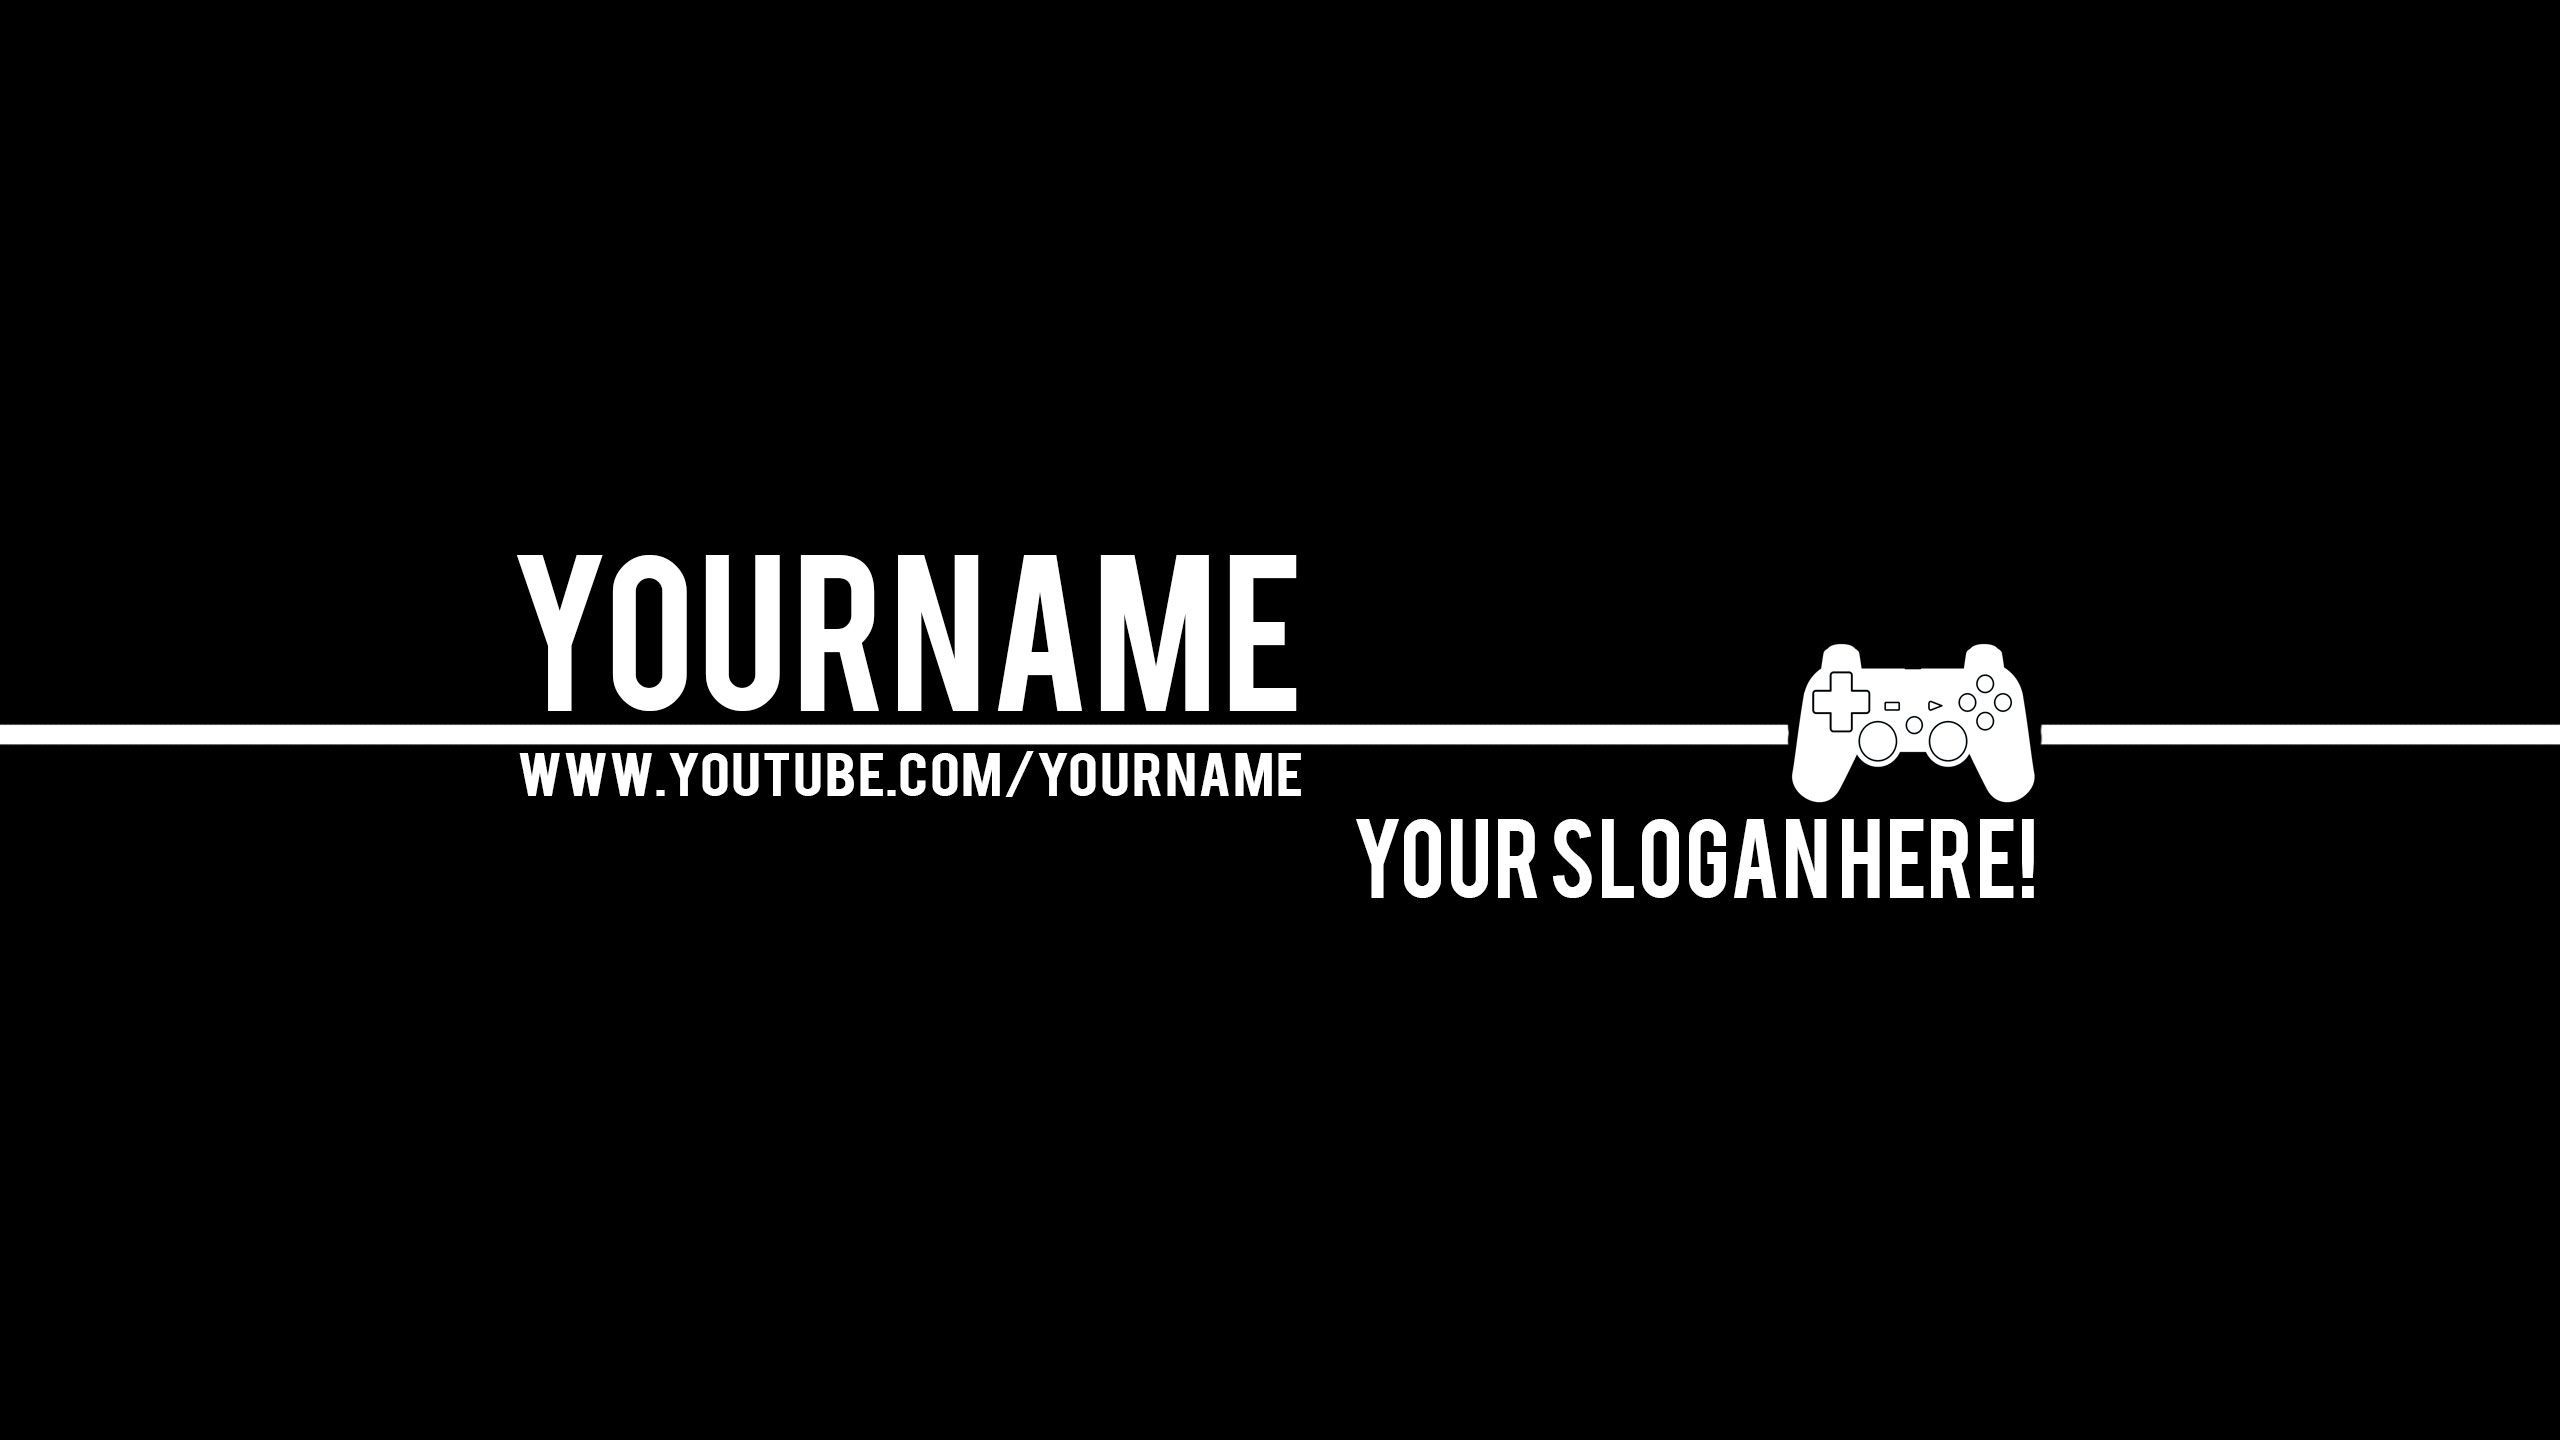 Youtube Gaming Wallpaper, Picture. Youtube banners, Youtube banner background, Gaming wallpaper